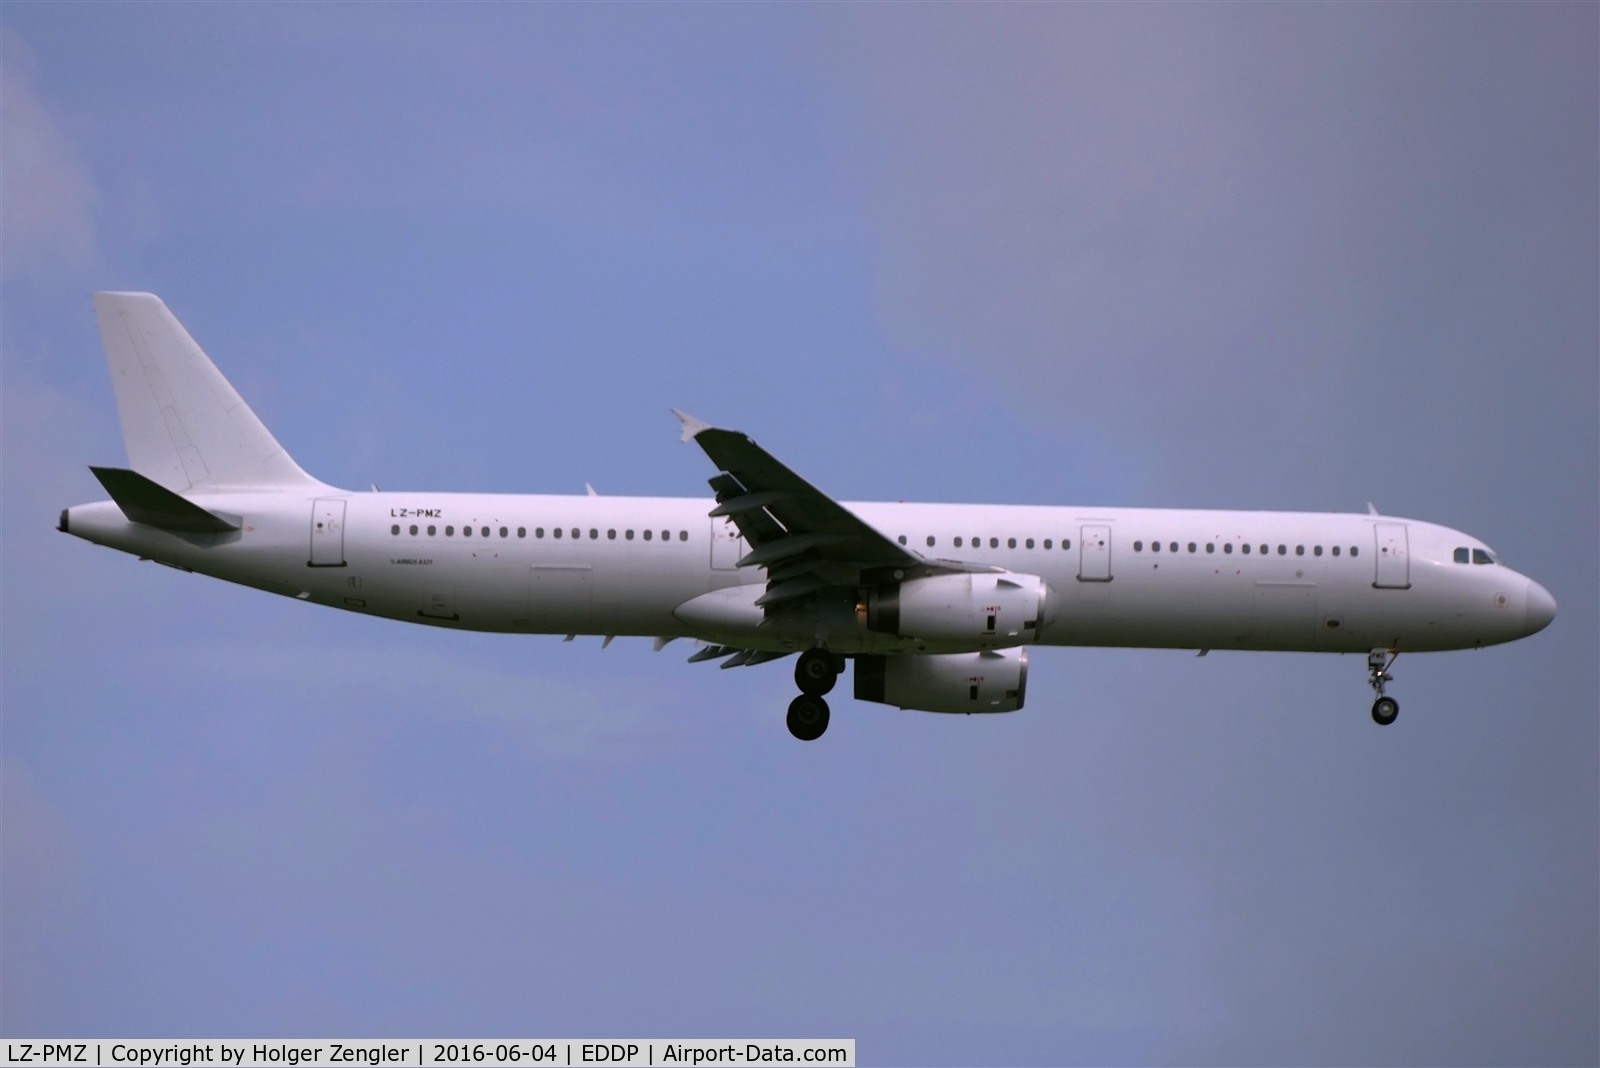 LZ-PMZ, 1999 Airbus A321-231 C/N 1060, A white knight from VAR.....